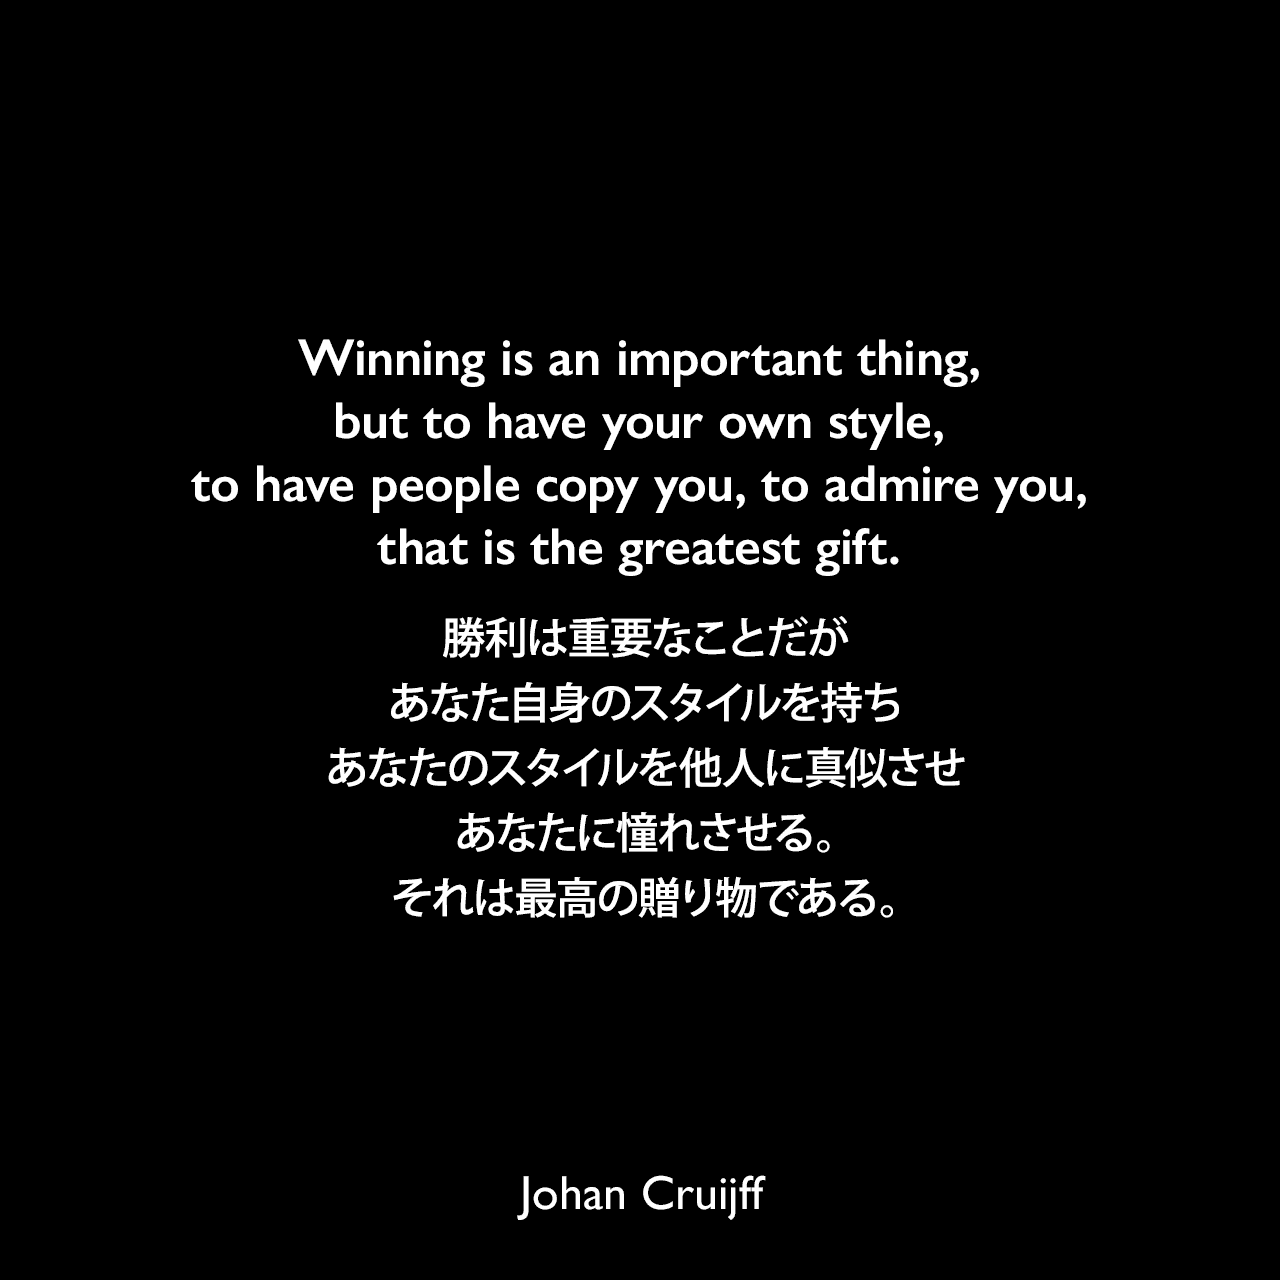 Winning is an important thing, but to have your own style, to have people copy you, to admire you, that is the greatest gift.勝利は重要なことだが、あなた自身のスタイルを持ち、あなたのスタイルを他人に真似させ、あなたに憧れさせる。それは最高の贈り物である。- 2016年3月ユーロスポーツ「Johan Cruyff's legacy? The whole of modern football」よりJohan Cruijff